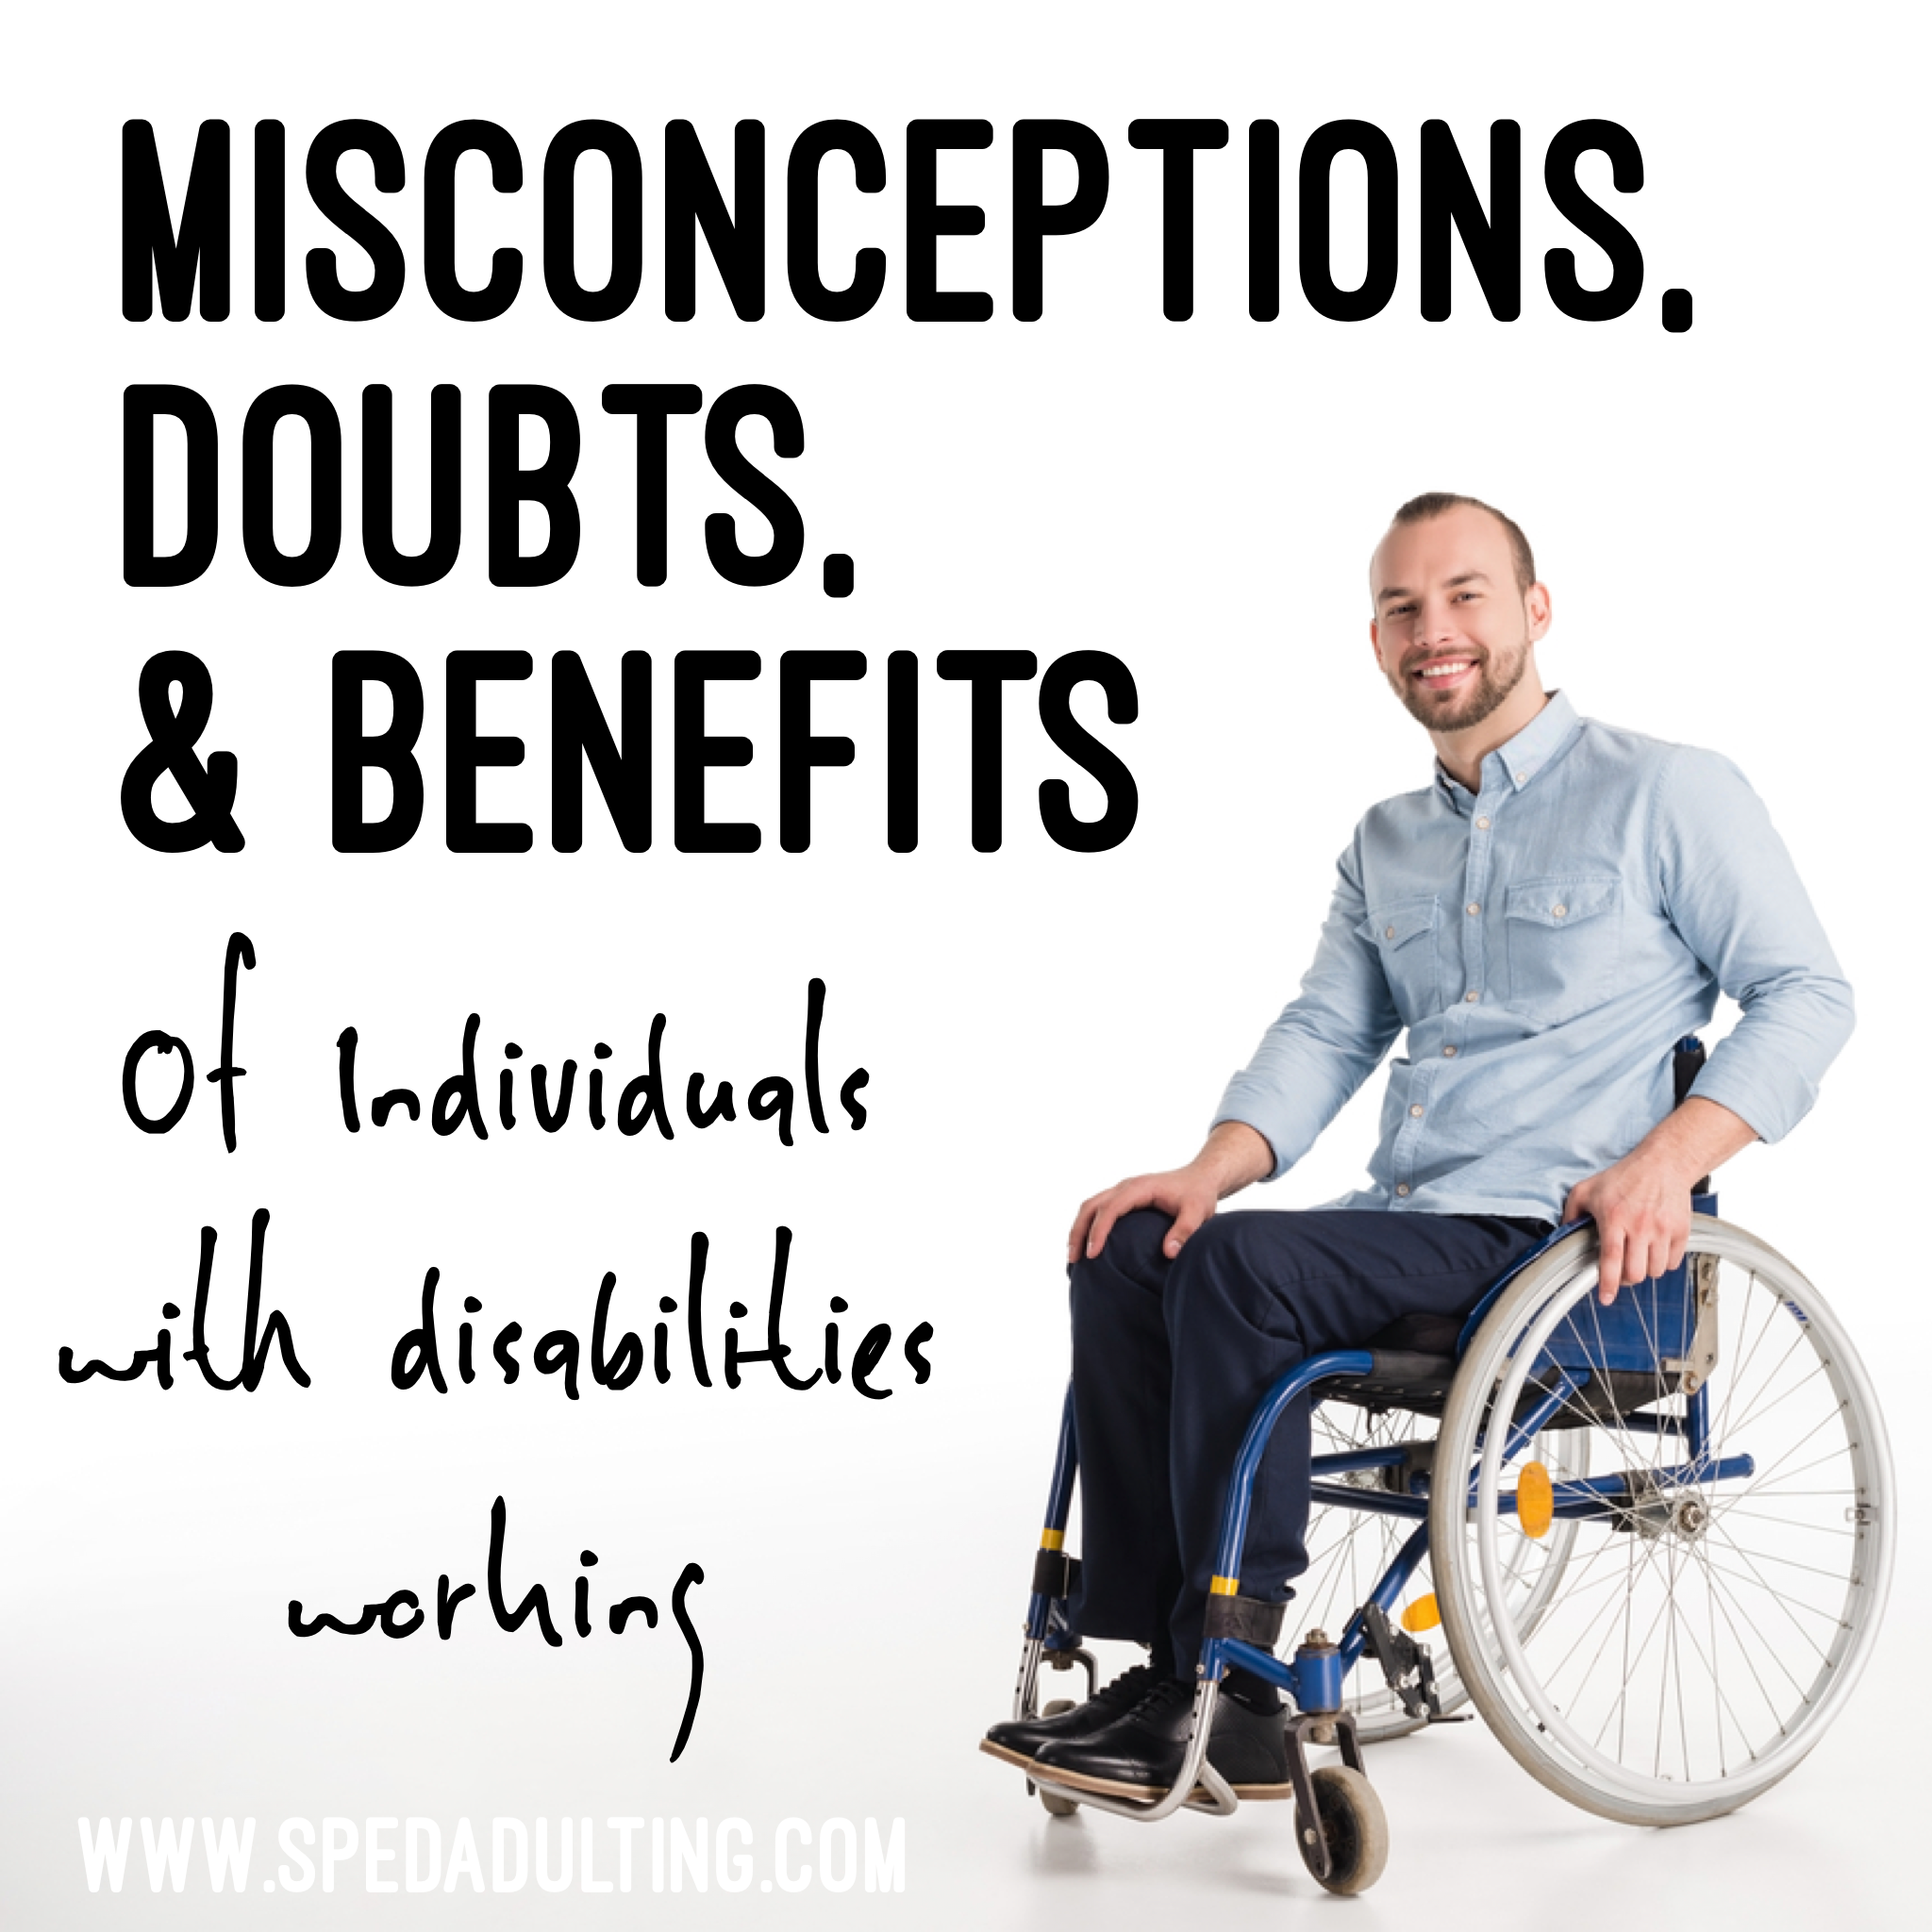 Misconceptions, doubts, and benefits of individuals with disabilities working.